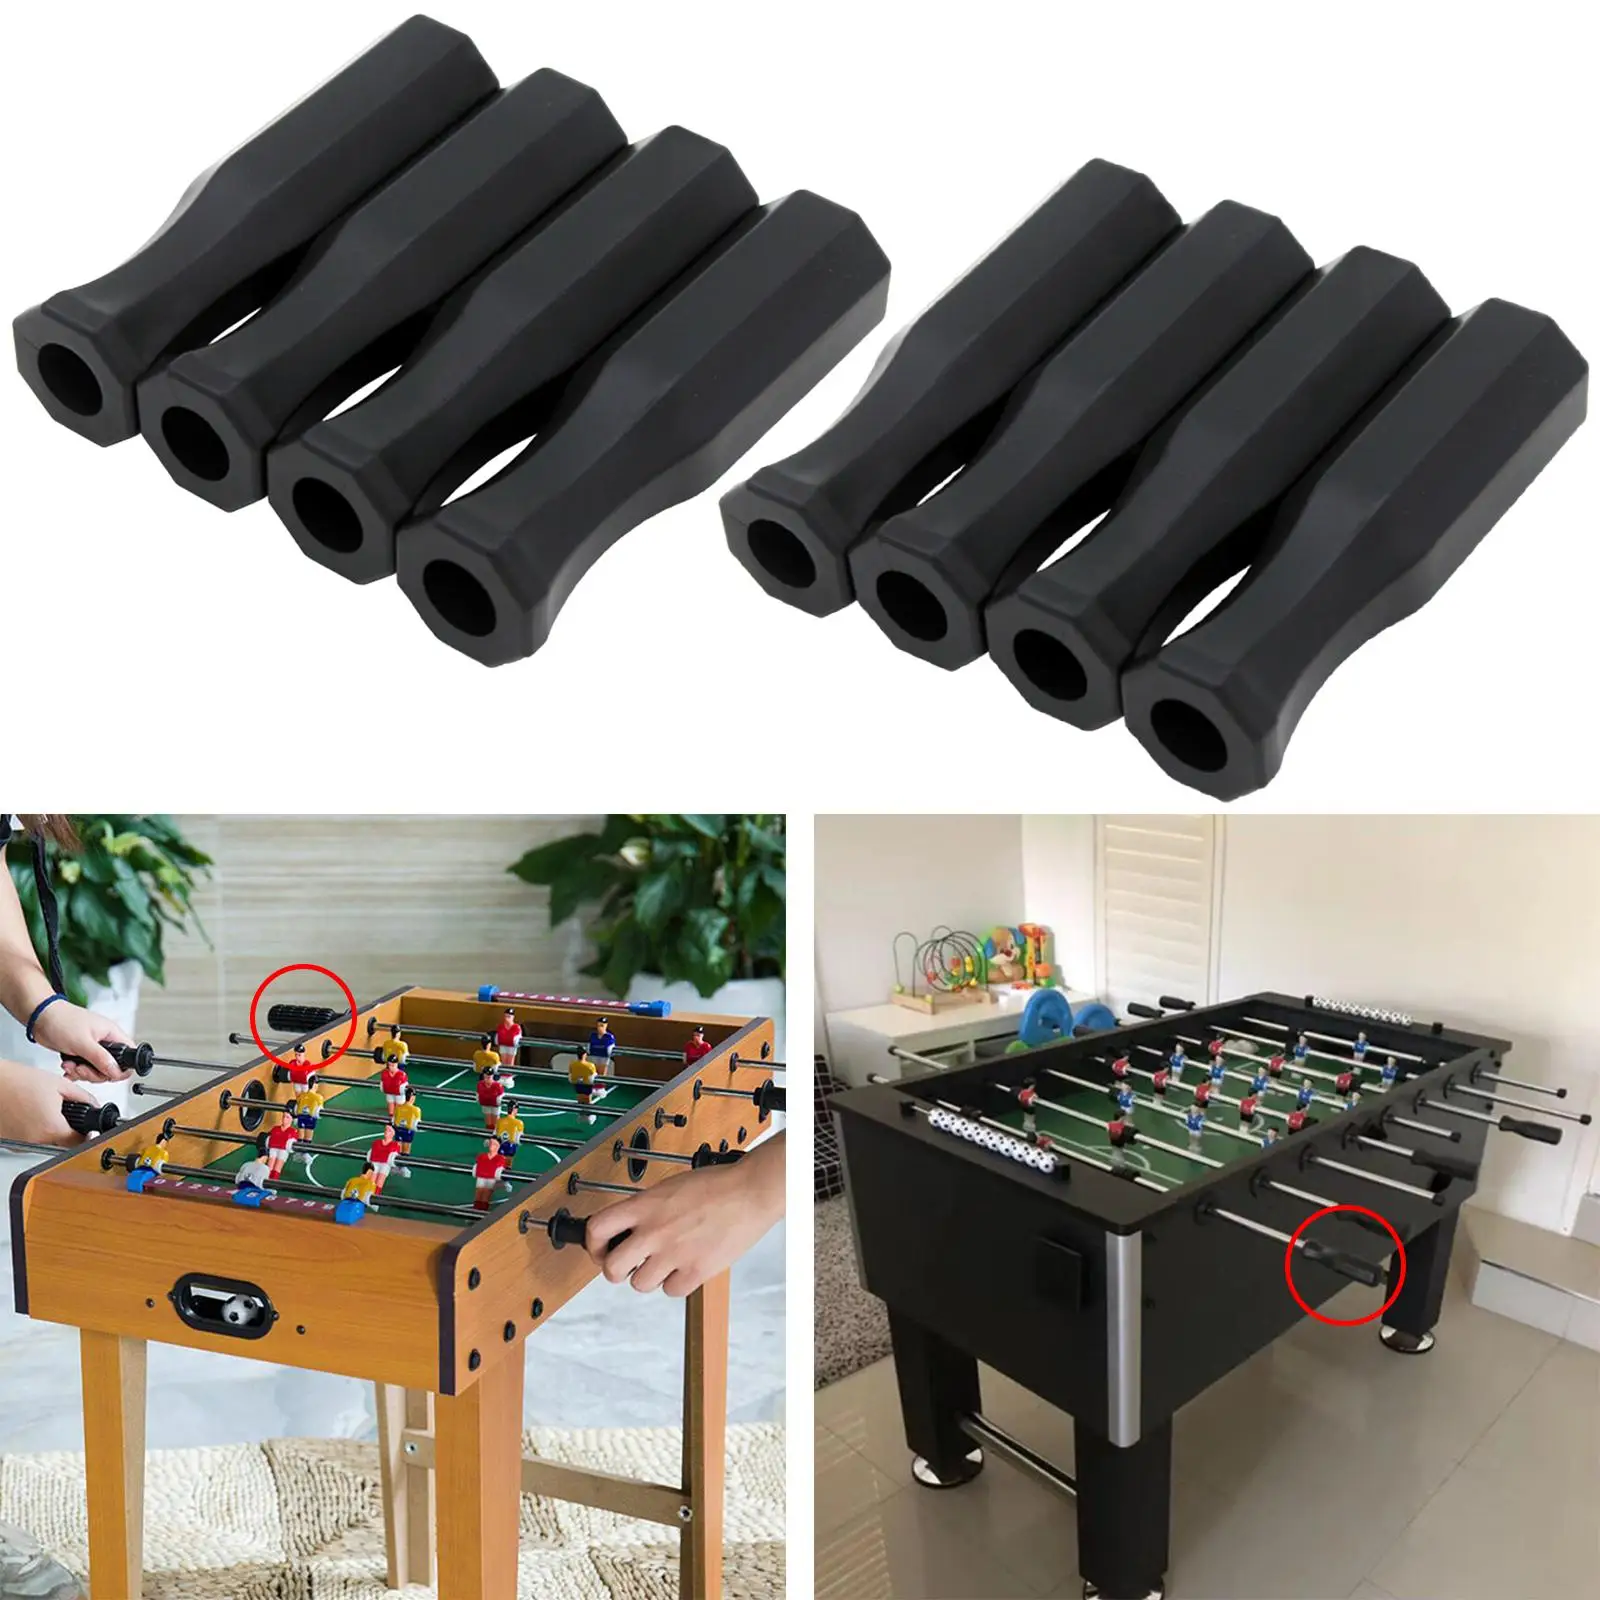 8 Pcs Table Soccer Foosball Handle Rod 11.8cm Foosball Soccer Table Football Machine Handle Grip Game Replacement Parts